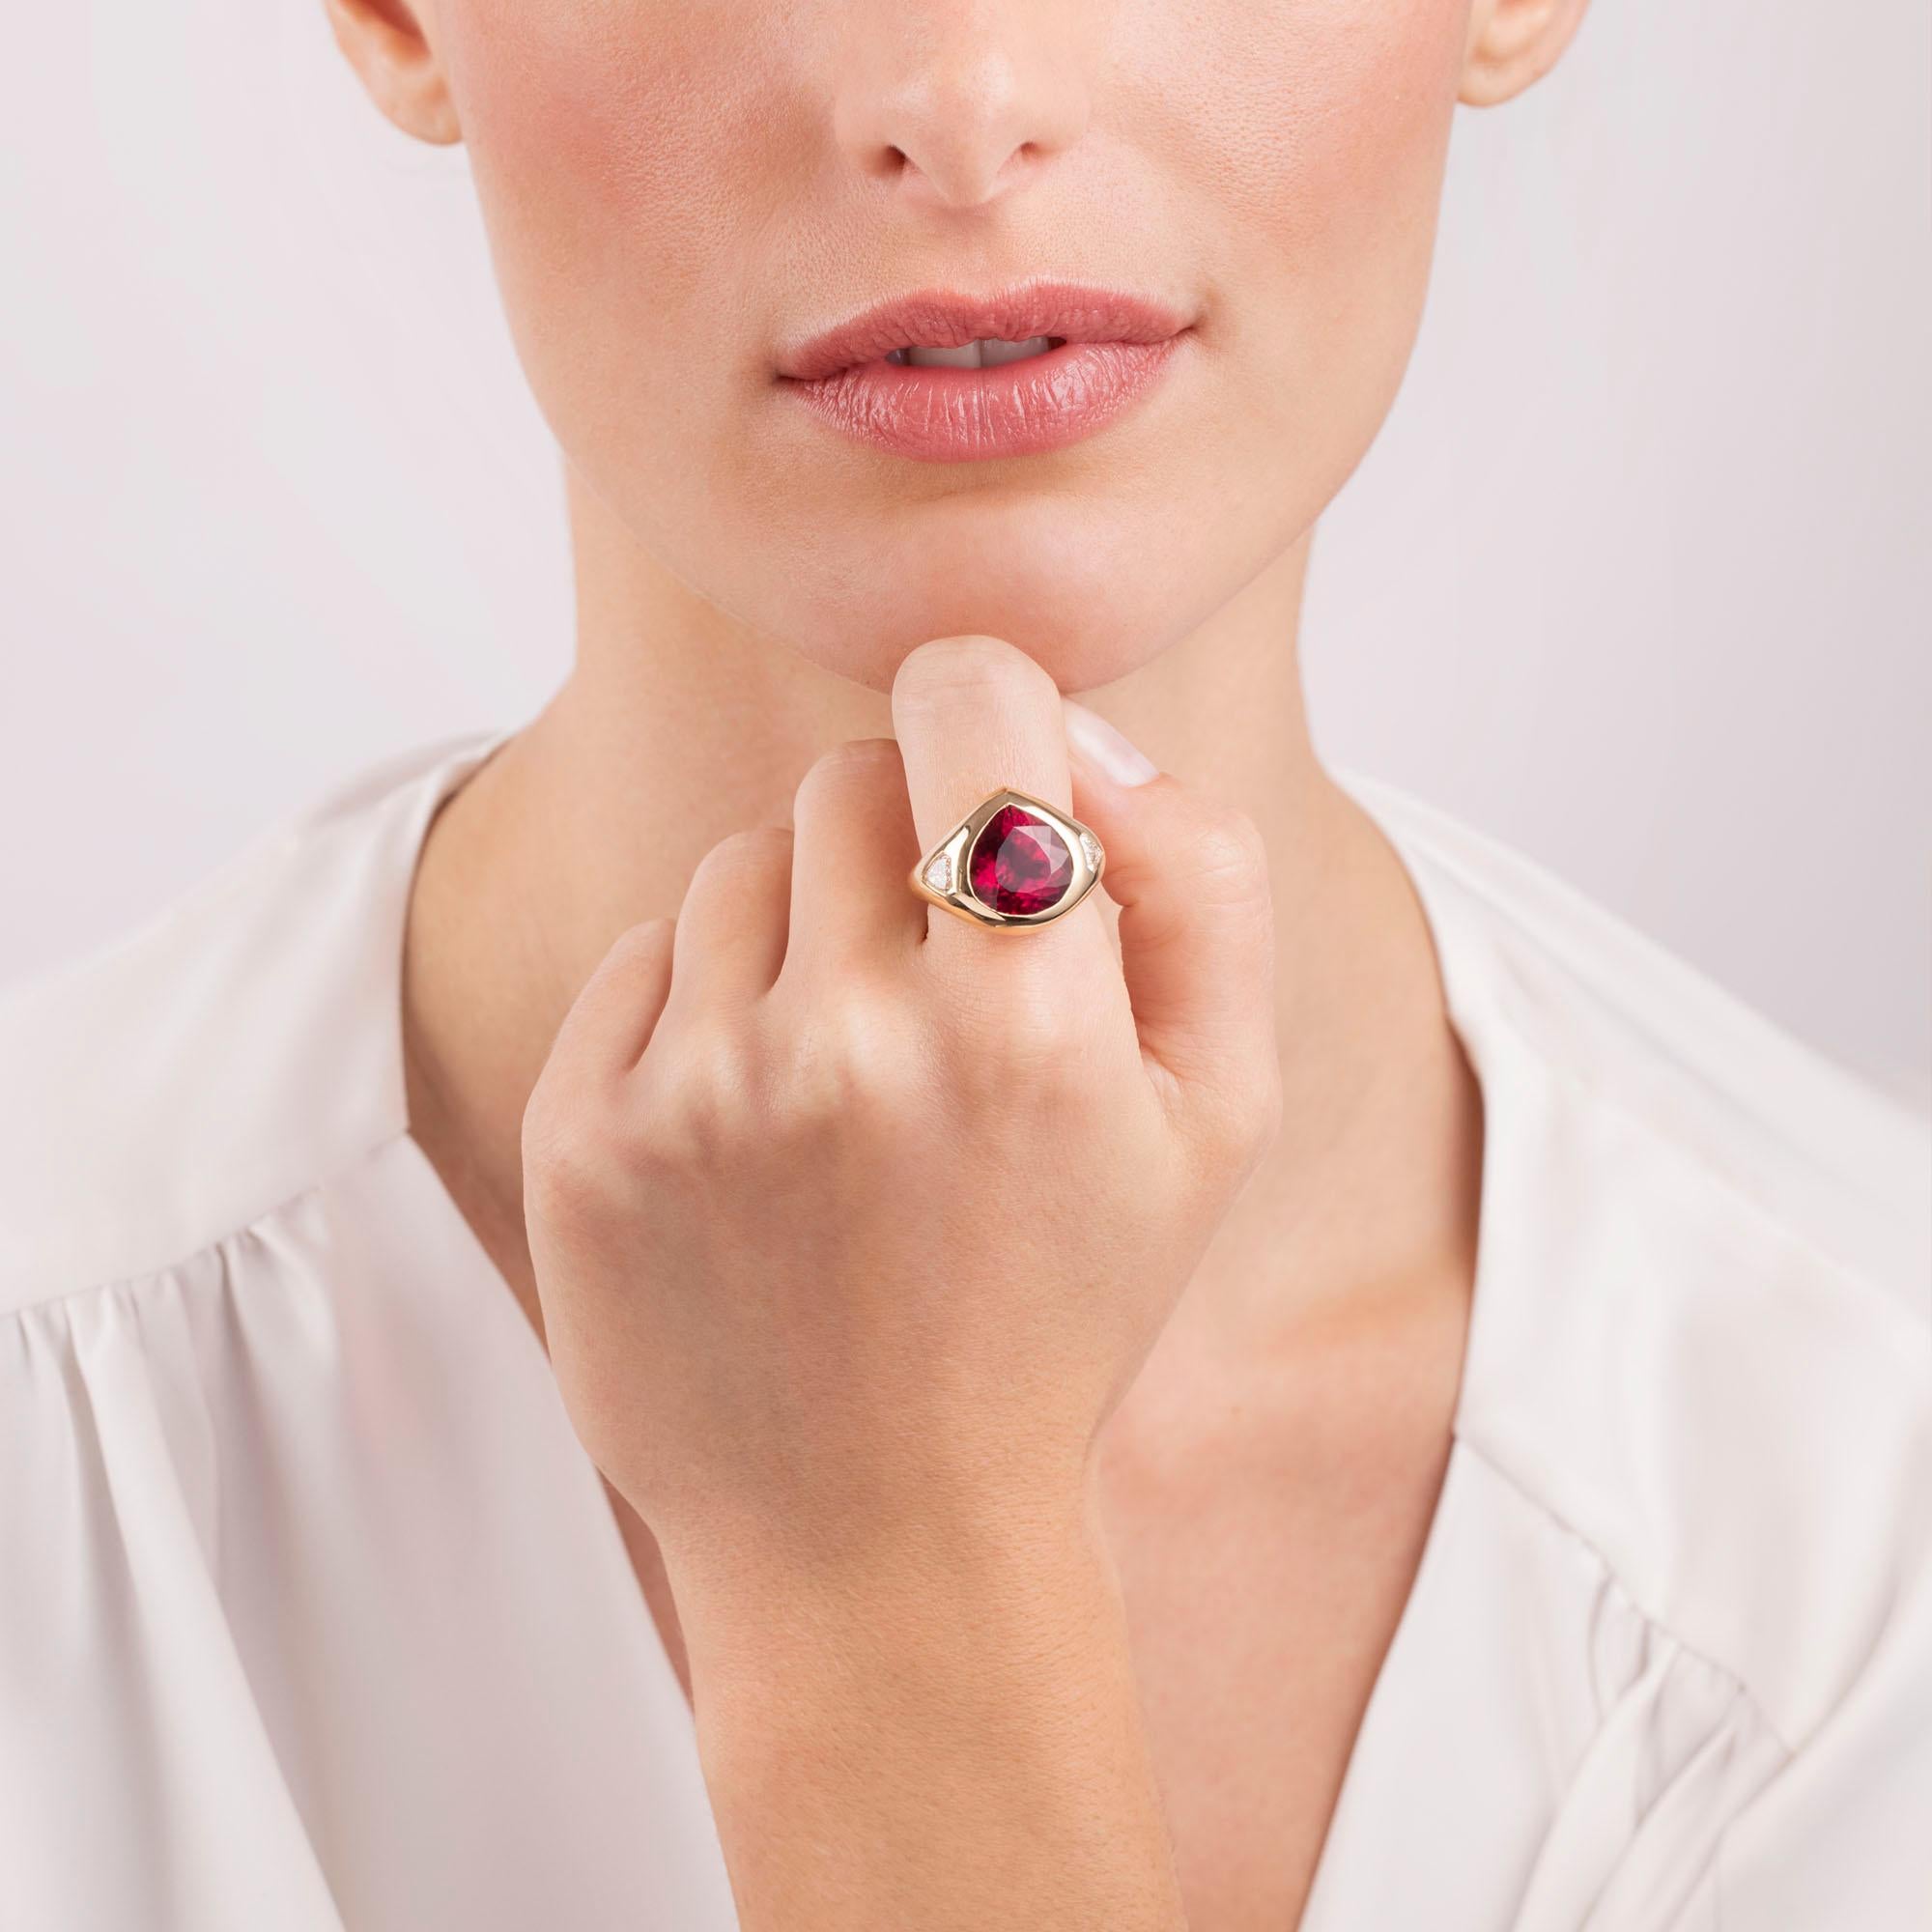 A simple yet striking modern heirloom, our Chunky Ring showcases a fiery rubellite tourmaline that is burnish set into a sleek 18k gold mounting which is polished to perfection. Two brilliant fancy cut shield diamonds are set along the outer edges